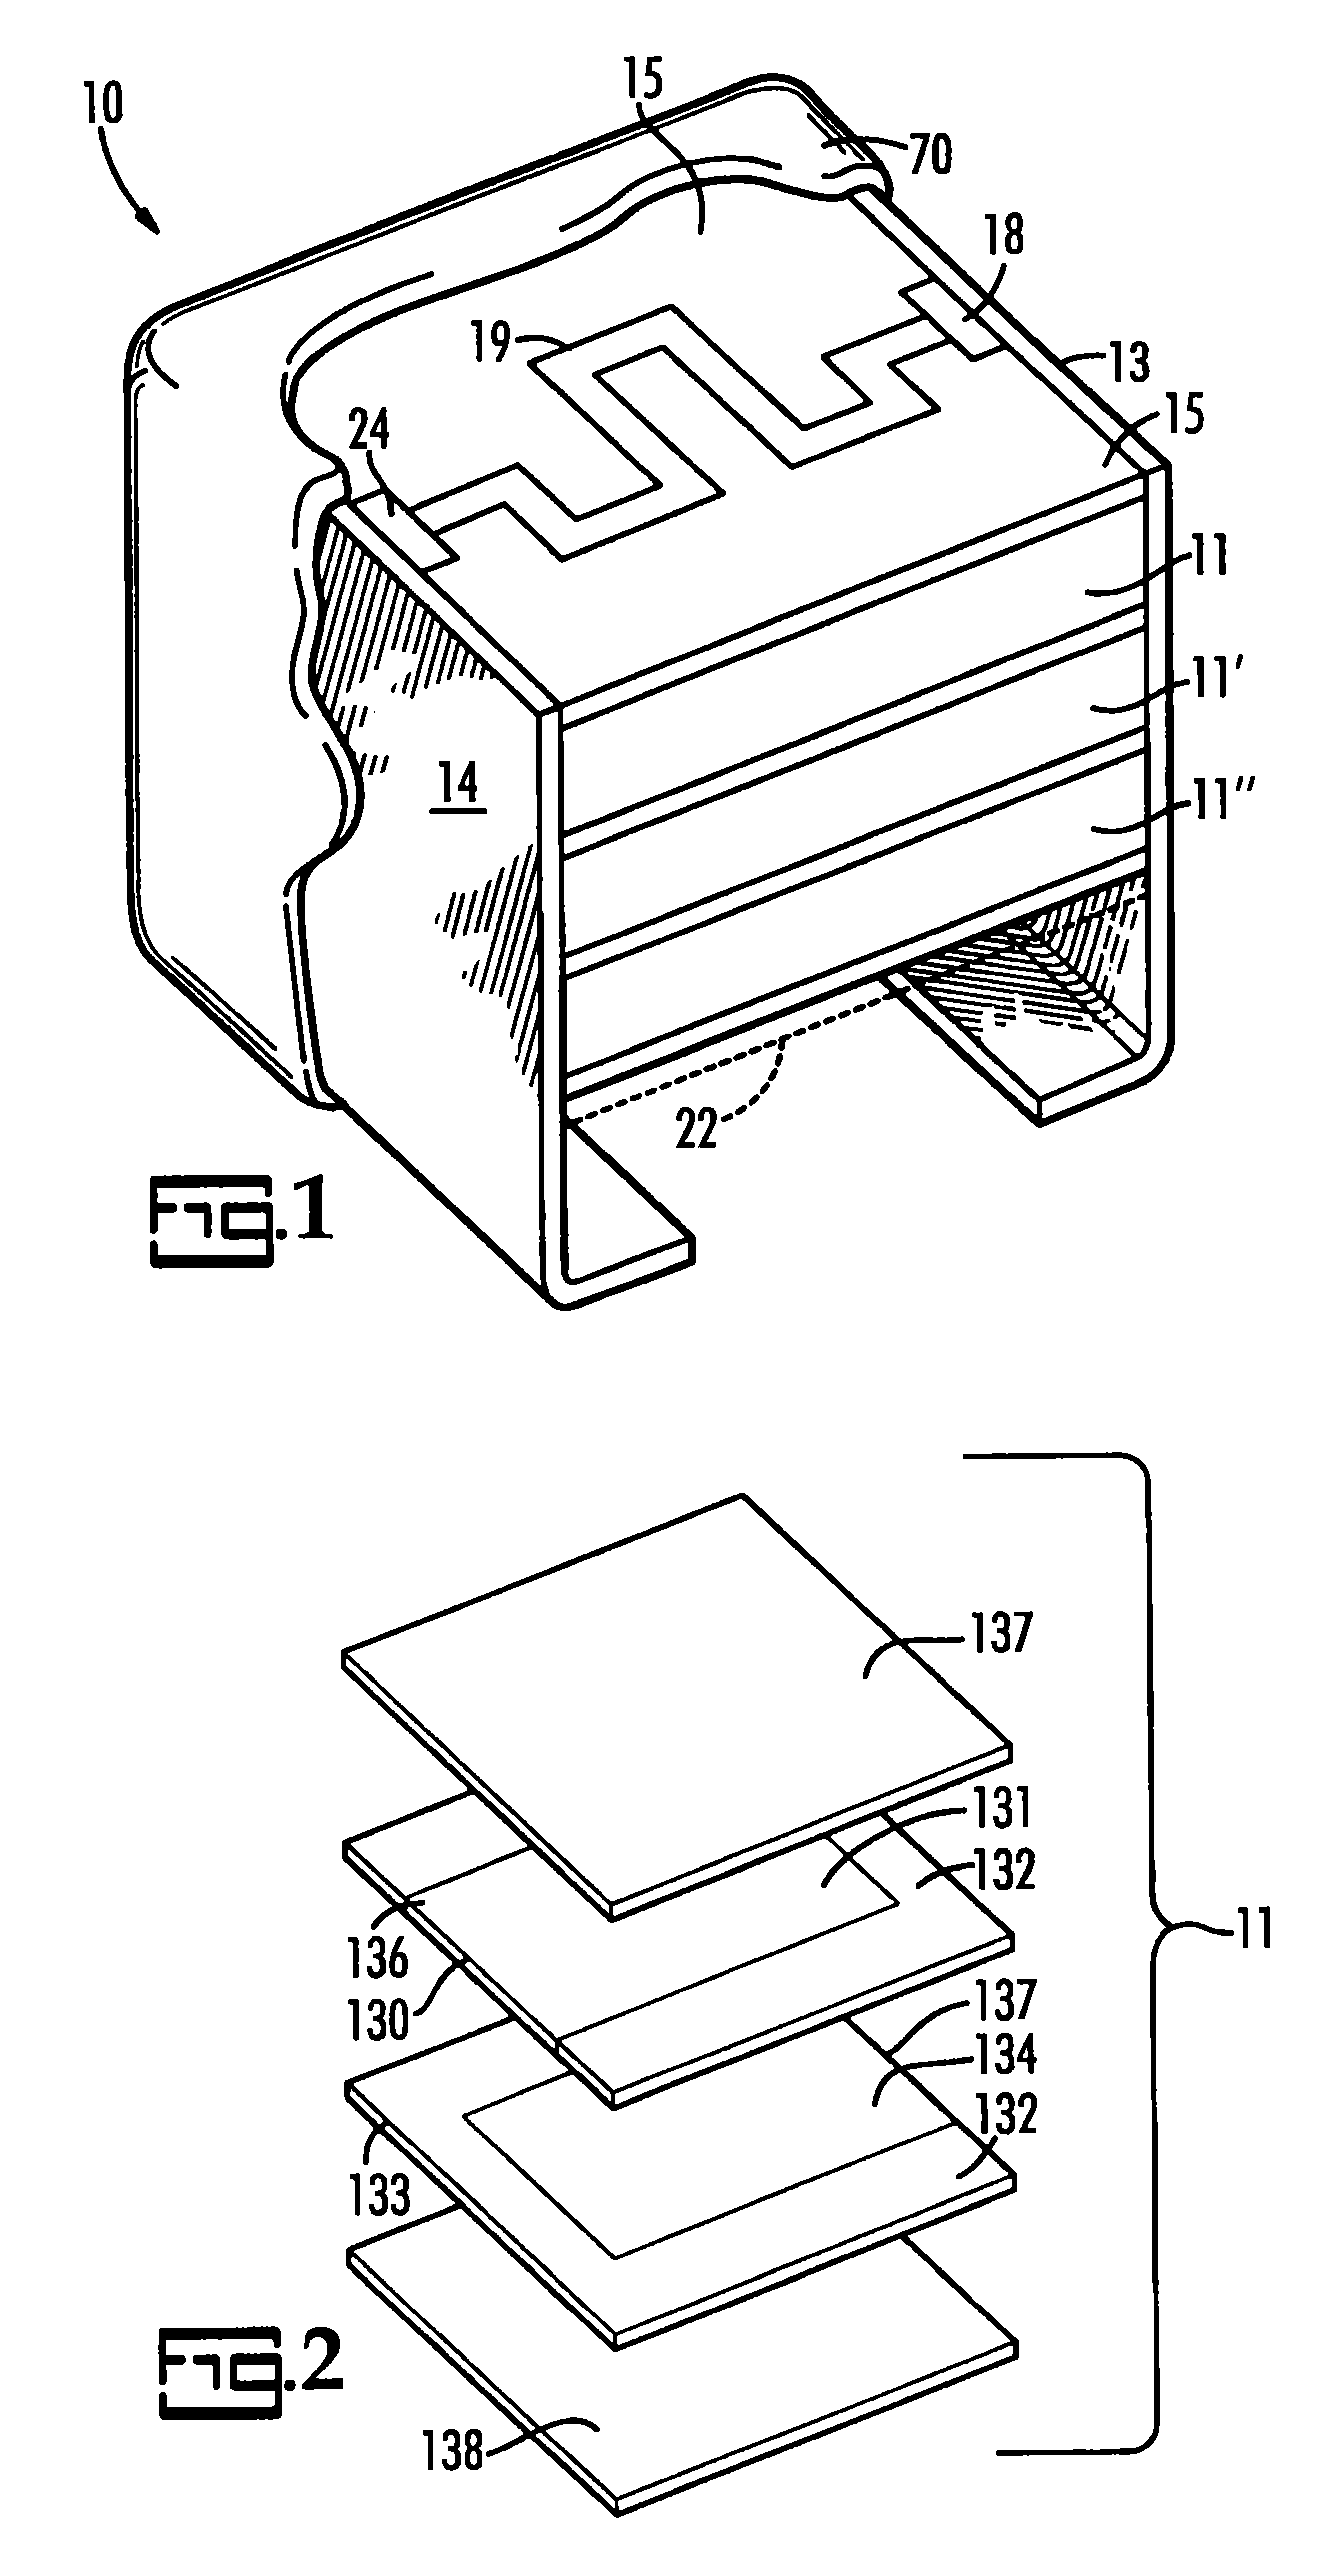 Externally fused and resistively loaded safety capacitor